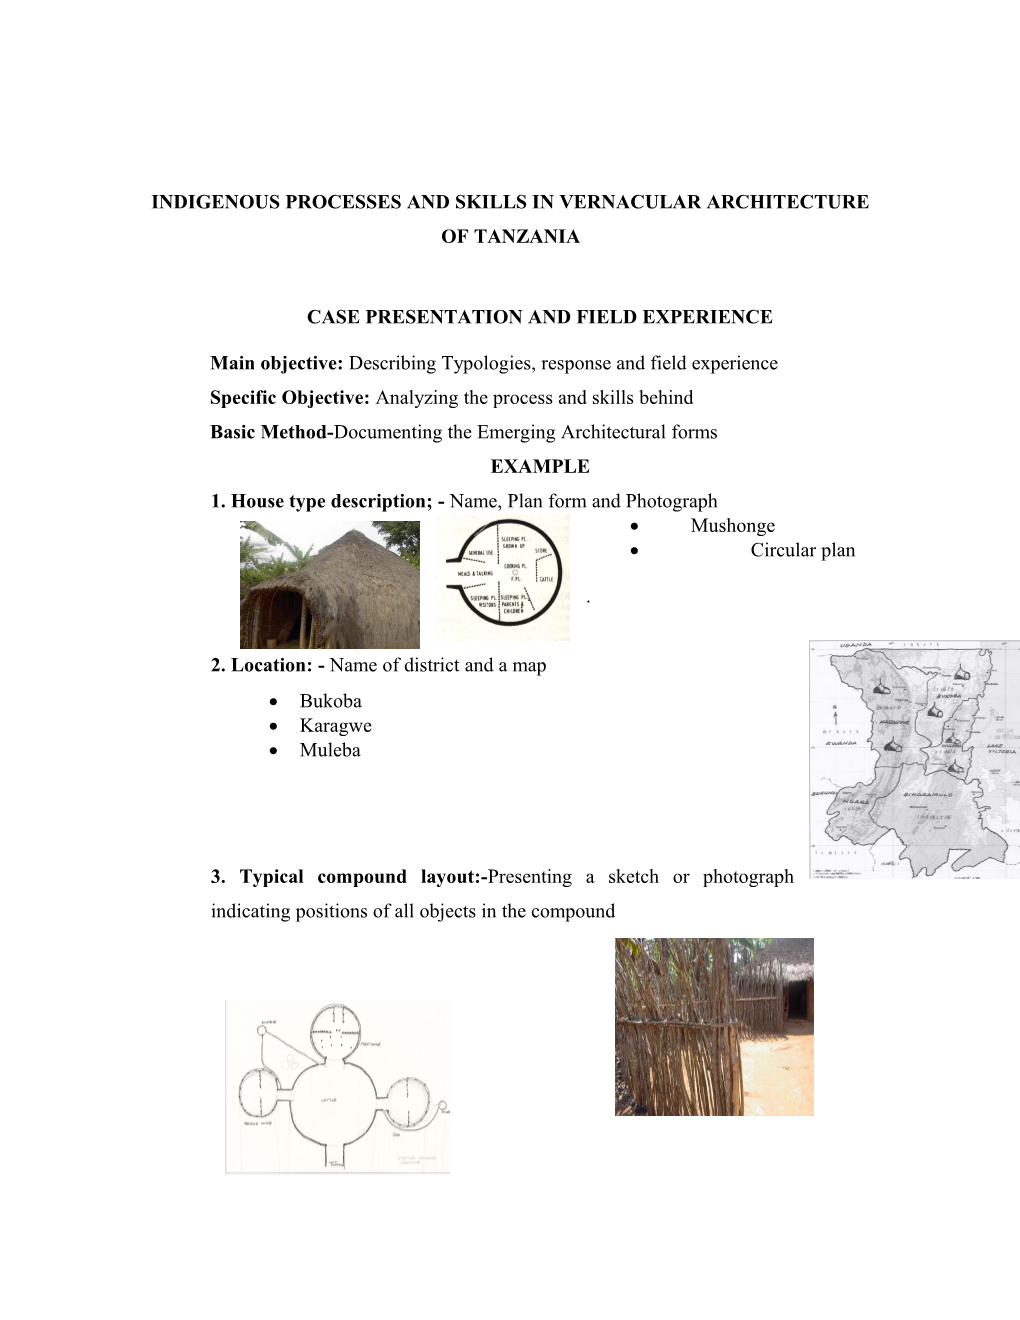 Indigenous Processes and Skills in Vernacular Architecture of Tanzania